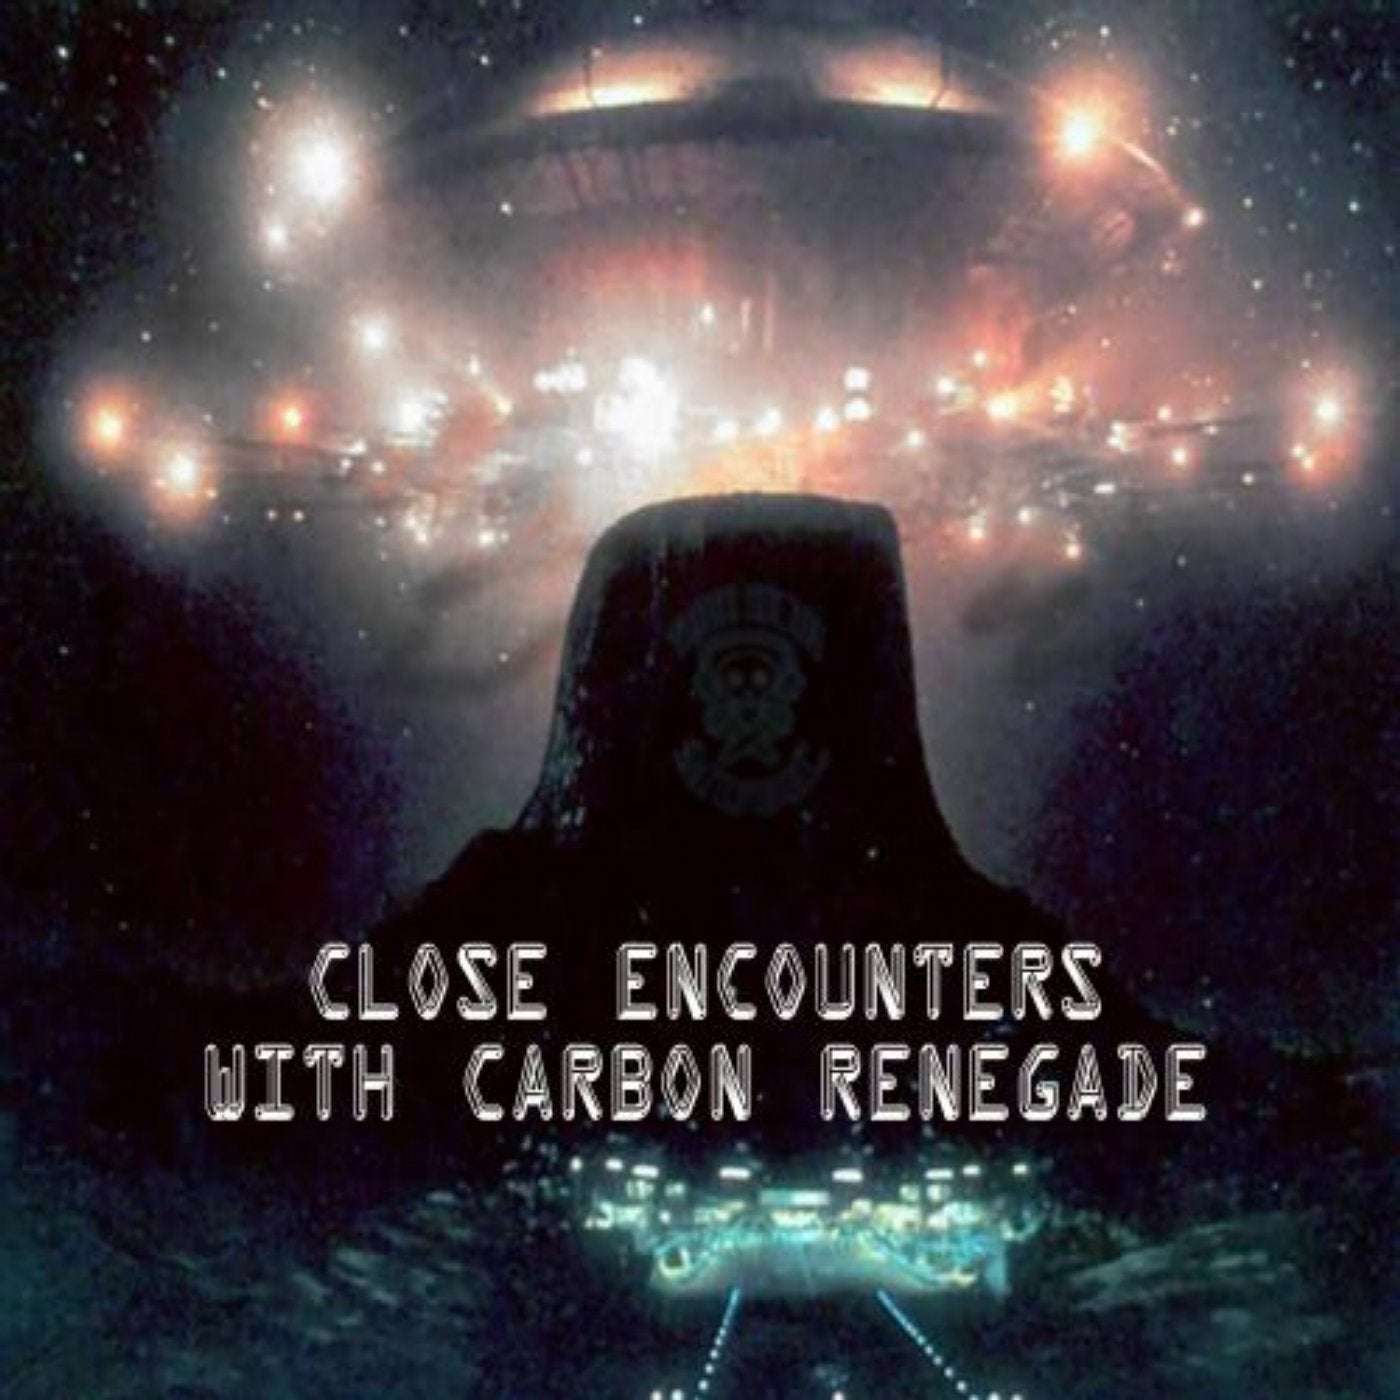 Close Encounters with Carbon Renegade